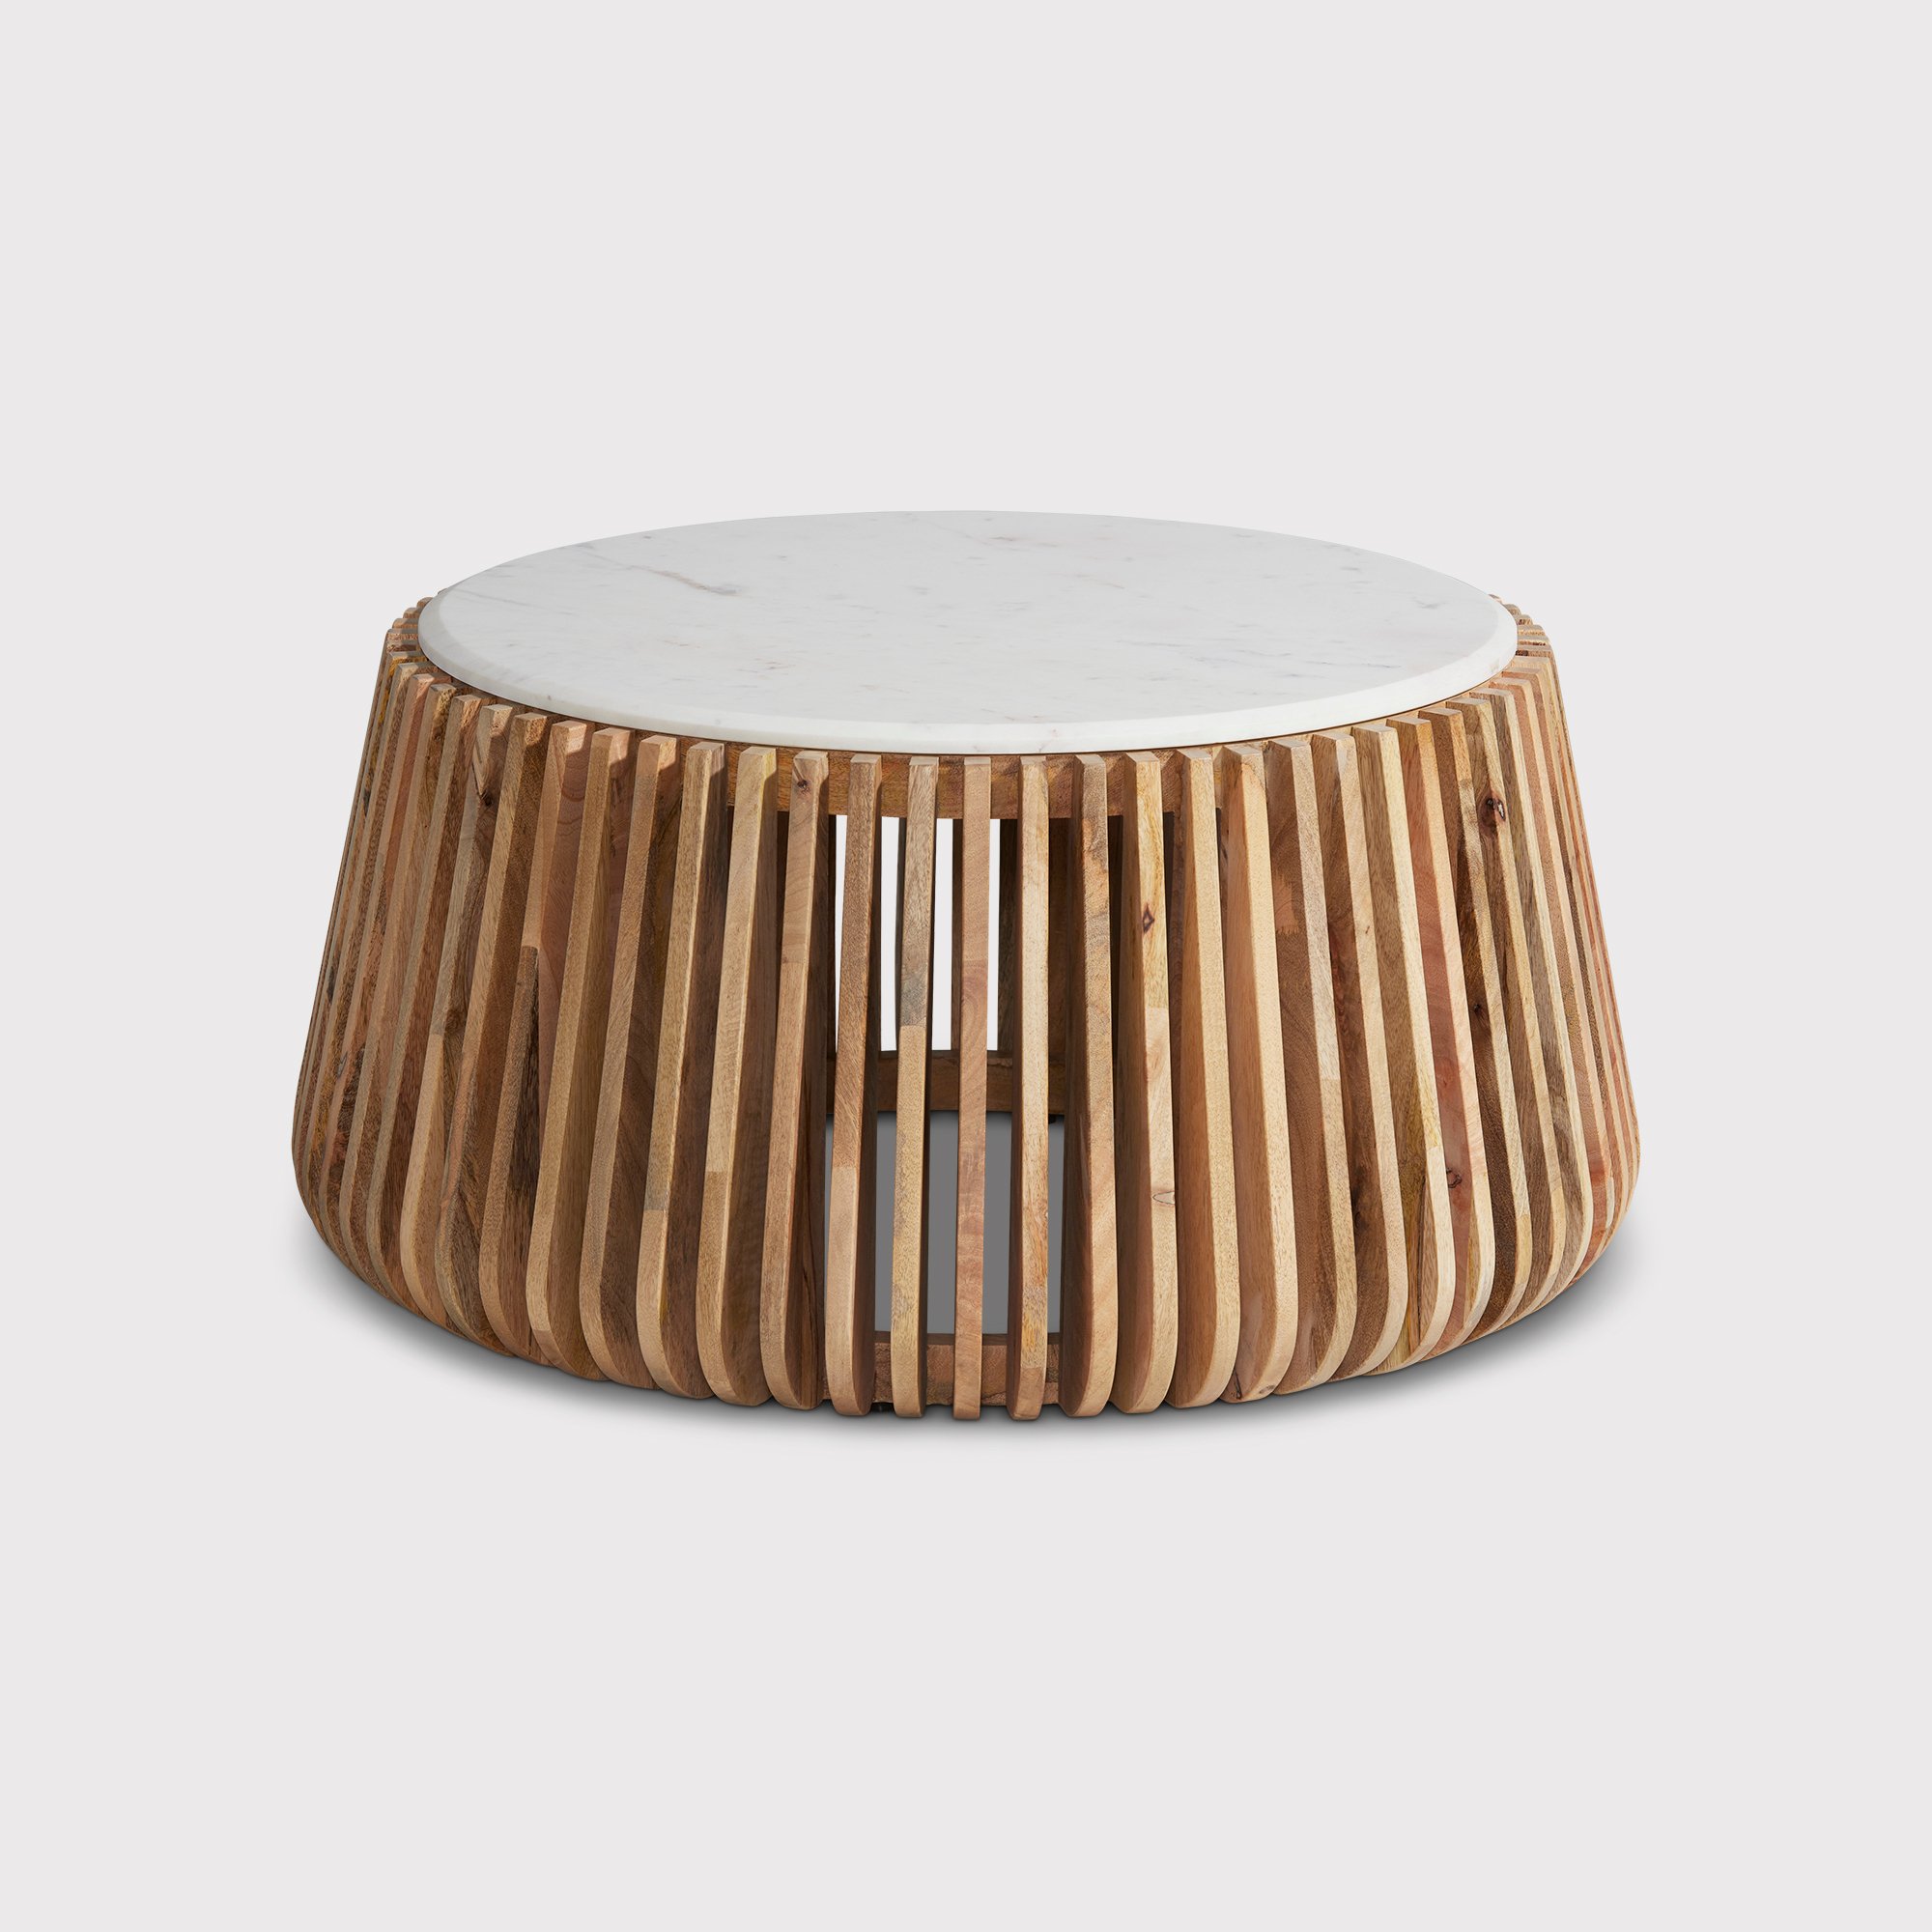 Ombra Coffee Table, Round, Neutral | Barker & Stonehouse